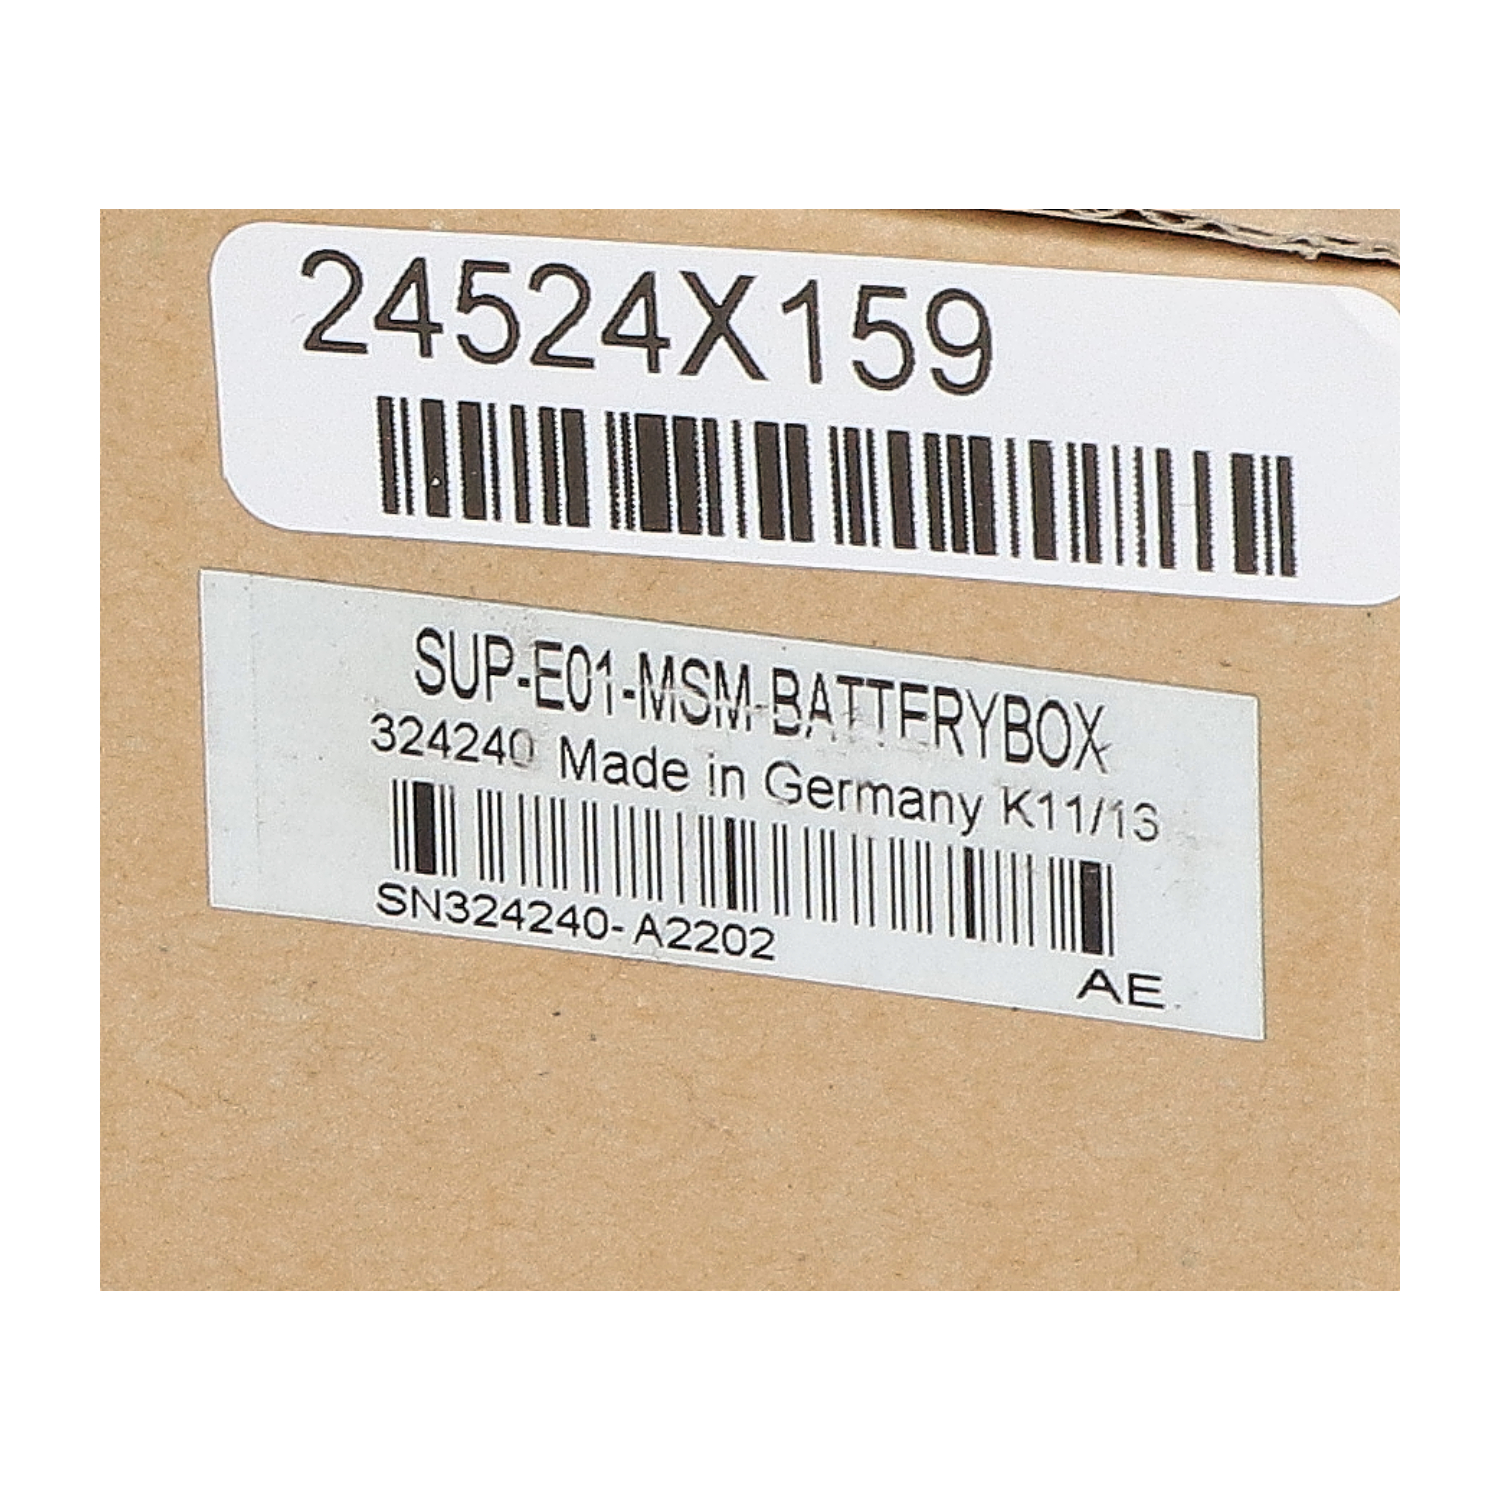 Bosch Sup E01 Msm Batterybox Used Ump